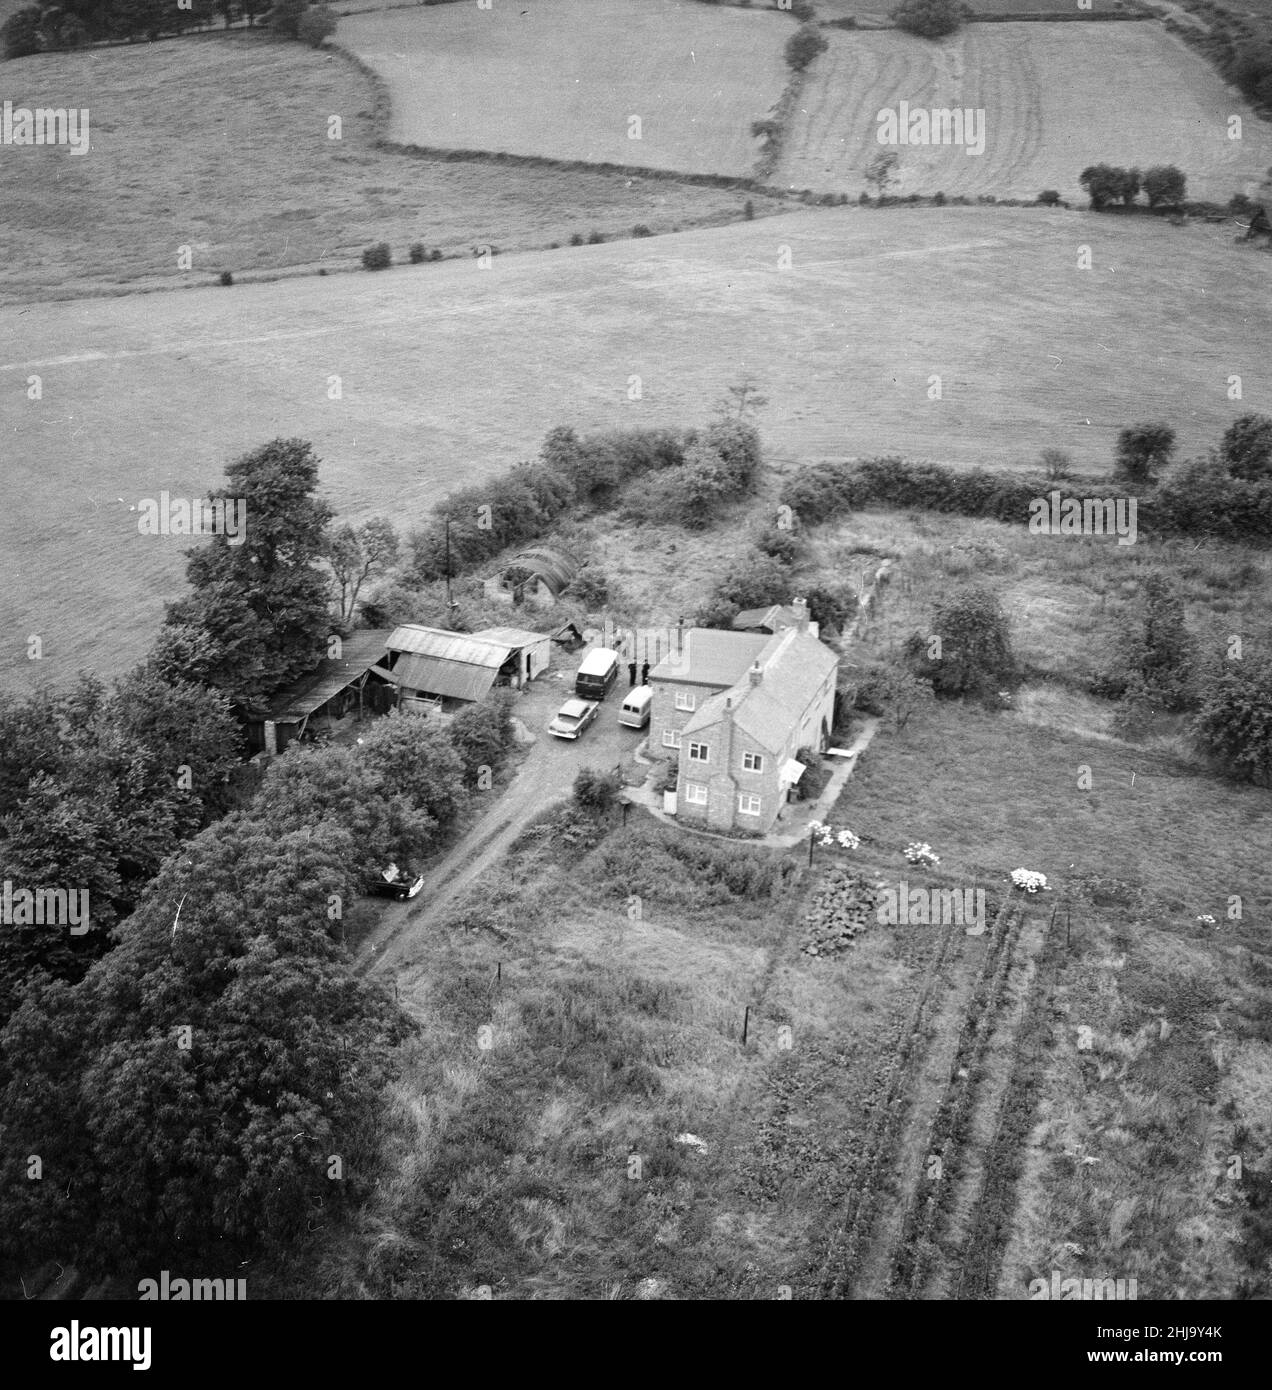 Leatherslade Farm, between Oakley and Brill in Buckinghamshire, hideout used by gang, 27 miles from the crime scene, Tuesday 13th August 1963. Our Picture Shows ... aerial view of remote farmhouse in Buckinghamshire used as hideaway by gang in immediate aftermath of robbery.    The 1963 Great Train Robbery was the robbery of 2.6 million pounds from a Royal Mail train heading from Glasgow to London on the West Coast Main Line in the early hours of 8th August 1963, at Bridego Railway Bridge, Ledburn, near Mentmore in  Buckinghamshire, England. Stock Photo